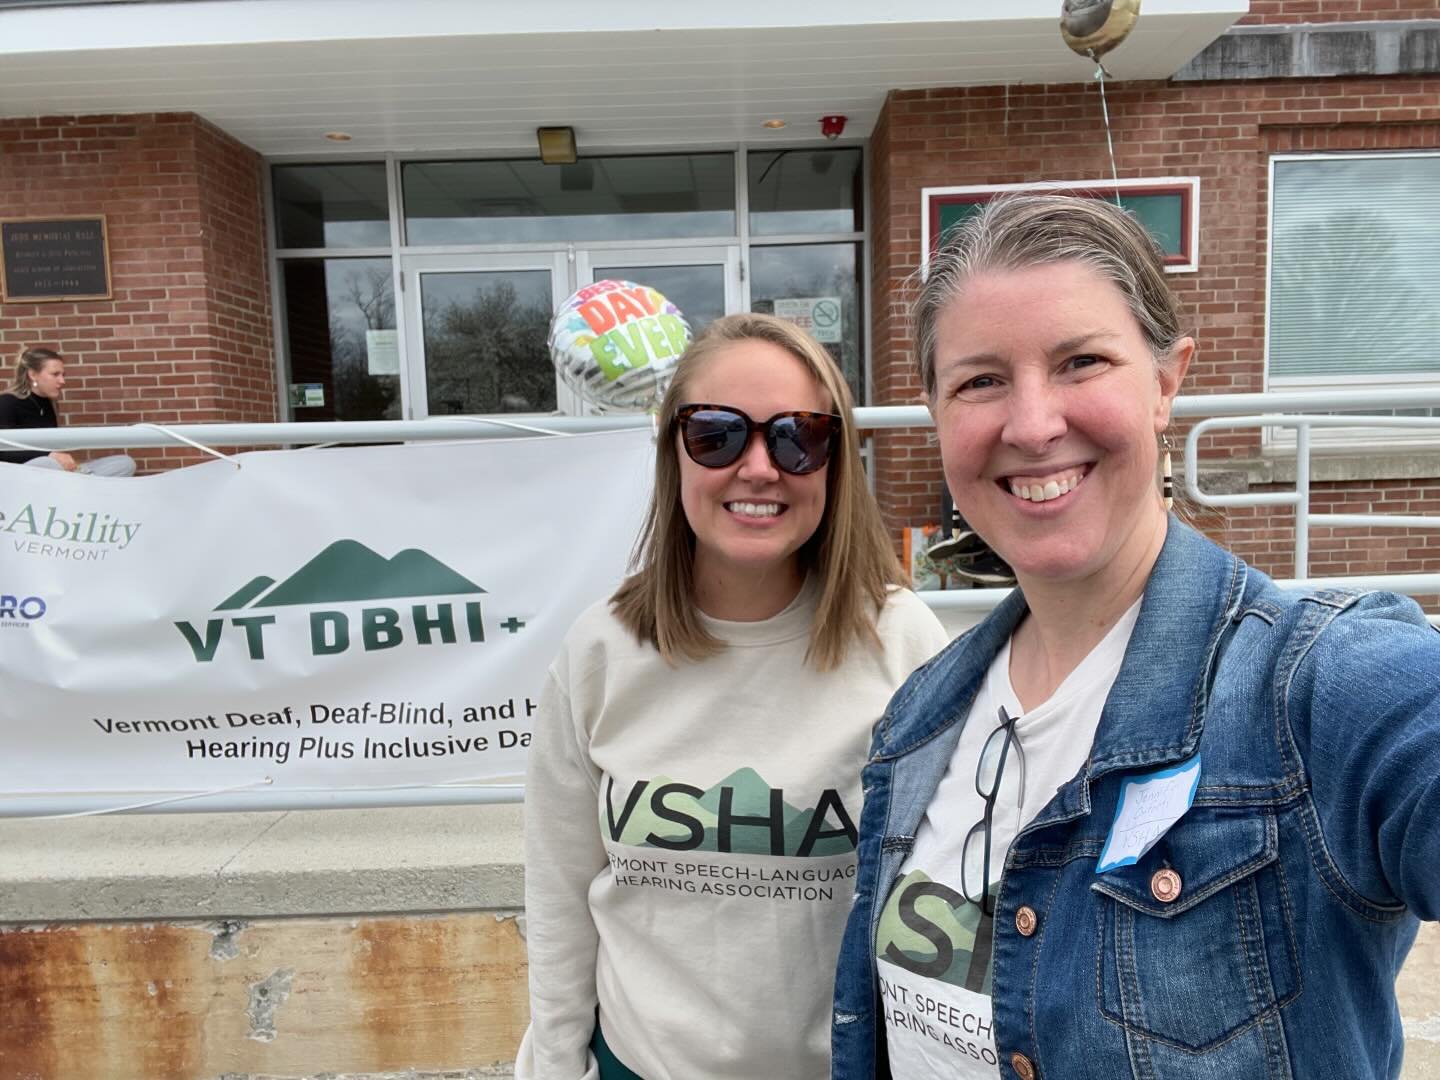 Emily and Jennifer networked at the VT DBHI+ Community Day in Randolph today. Thank you to the organizers for inviting VSHA!